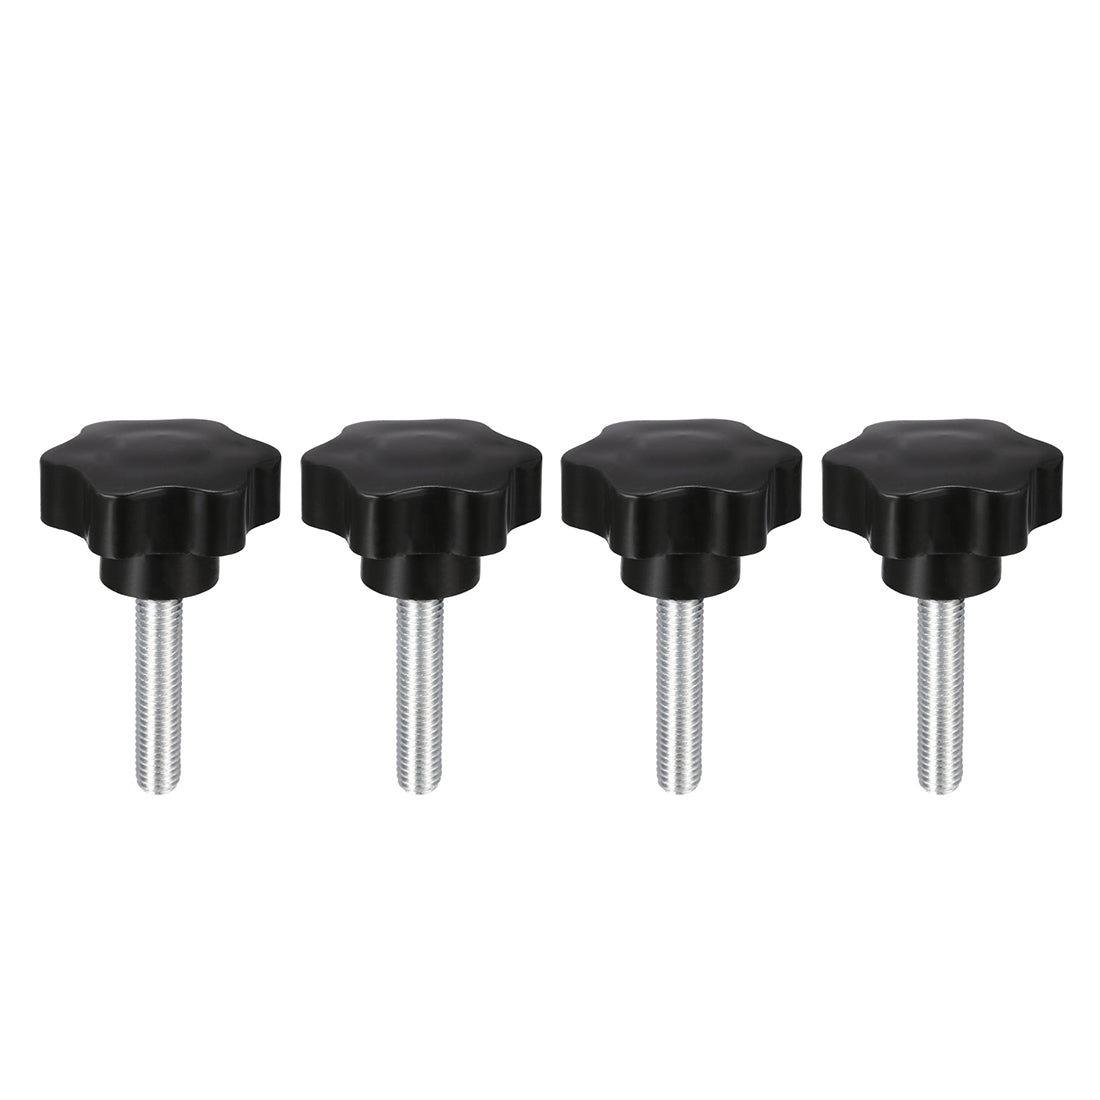 uxcell Uxcell Clamping Screw Knob Plum Hex Shaped Grips Star Knob Male Thread 4pcs